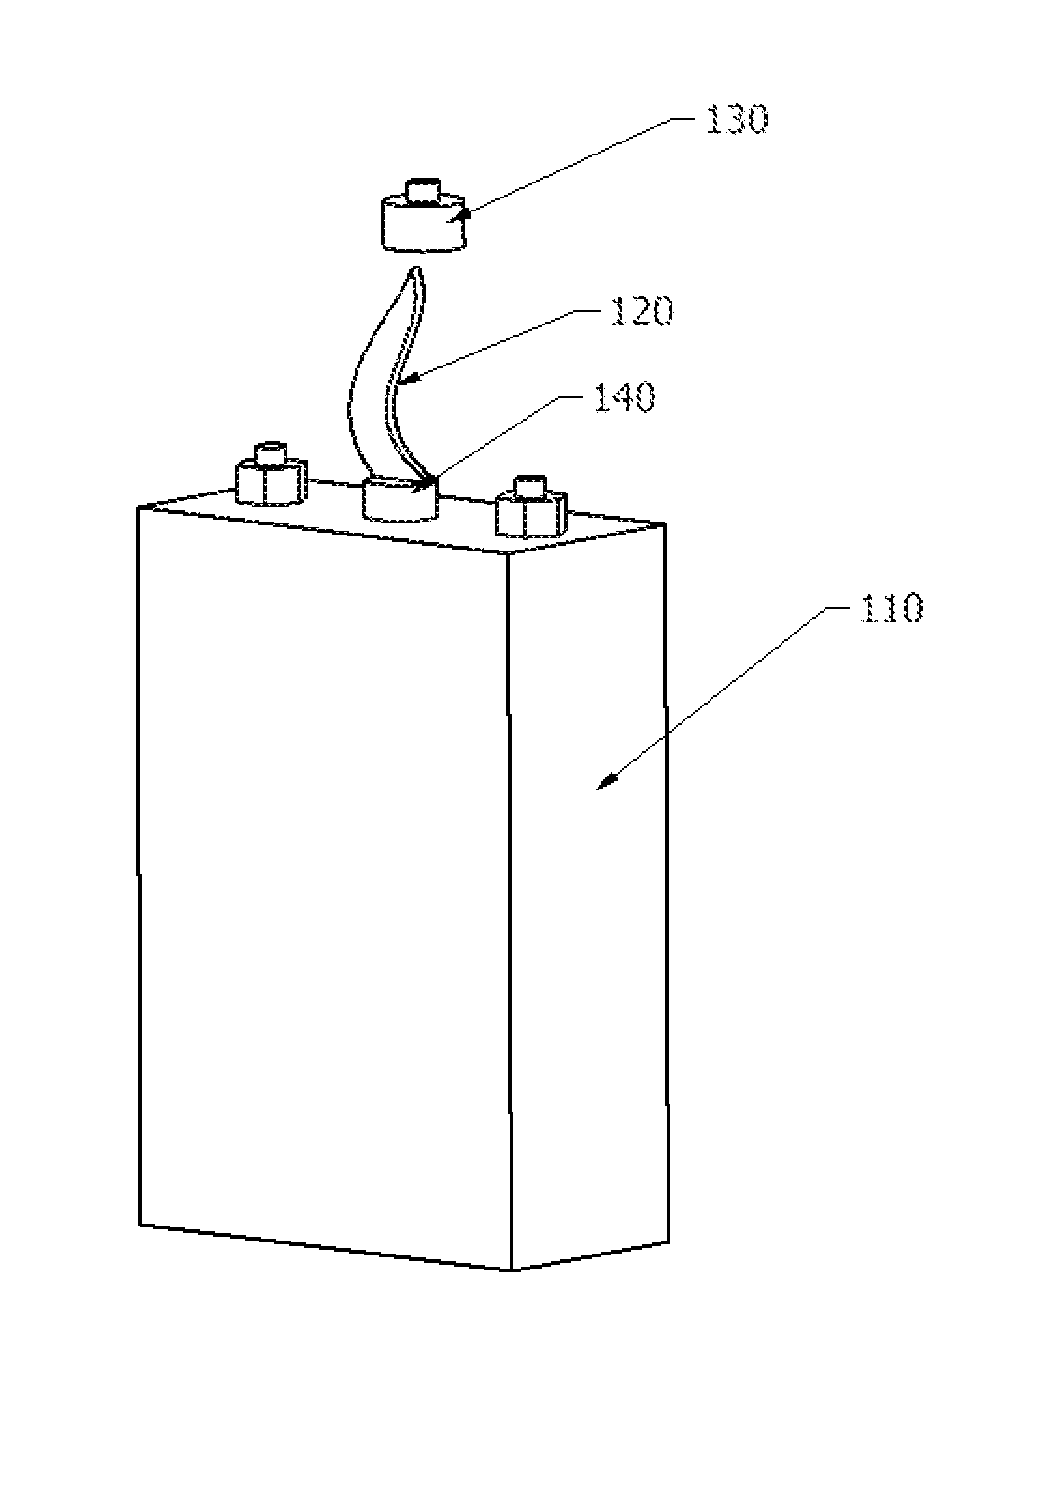 Method of detecting lithium-ion cell damage via vapor detection